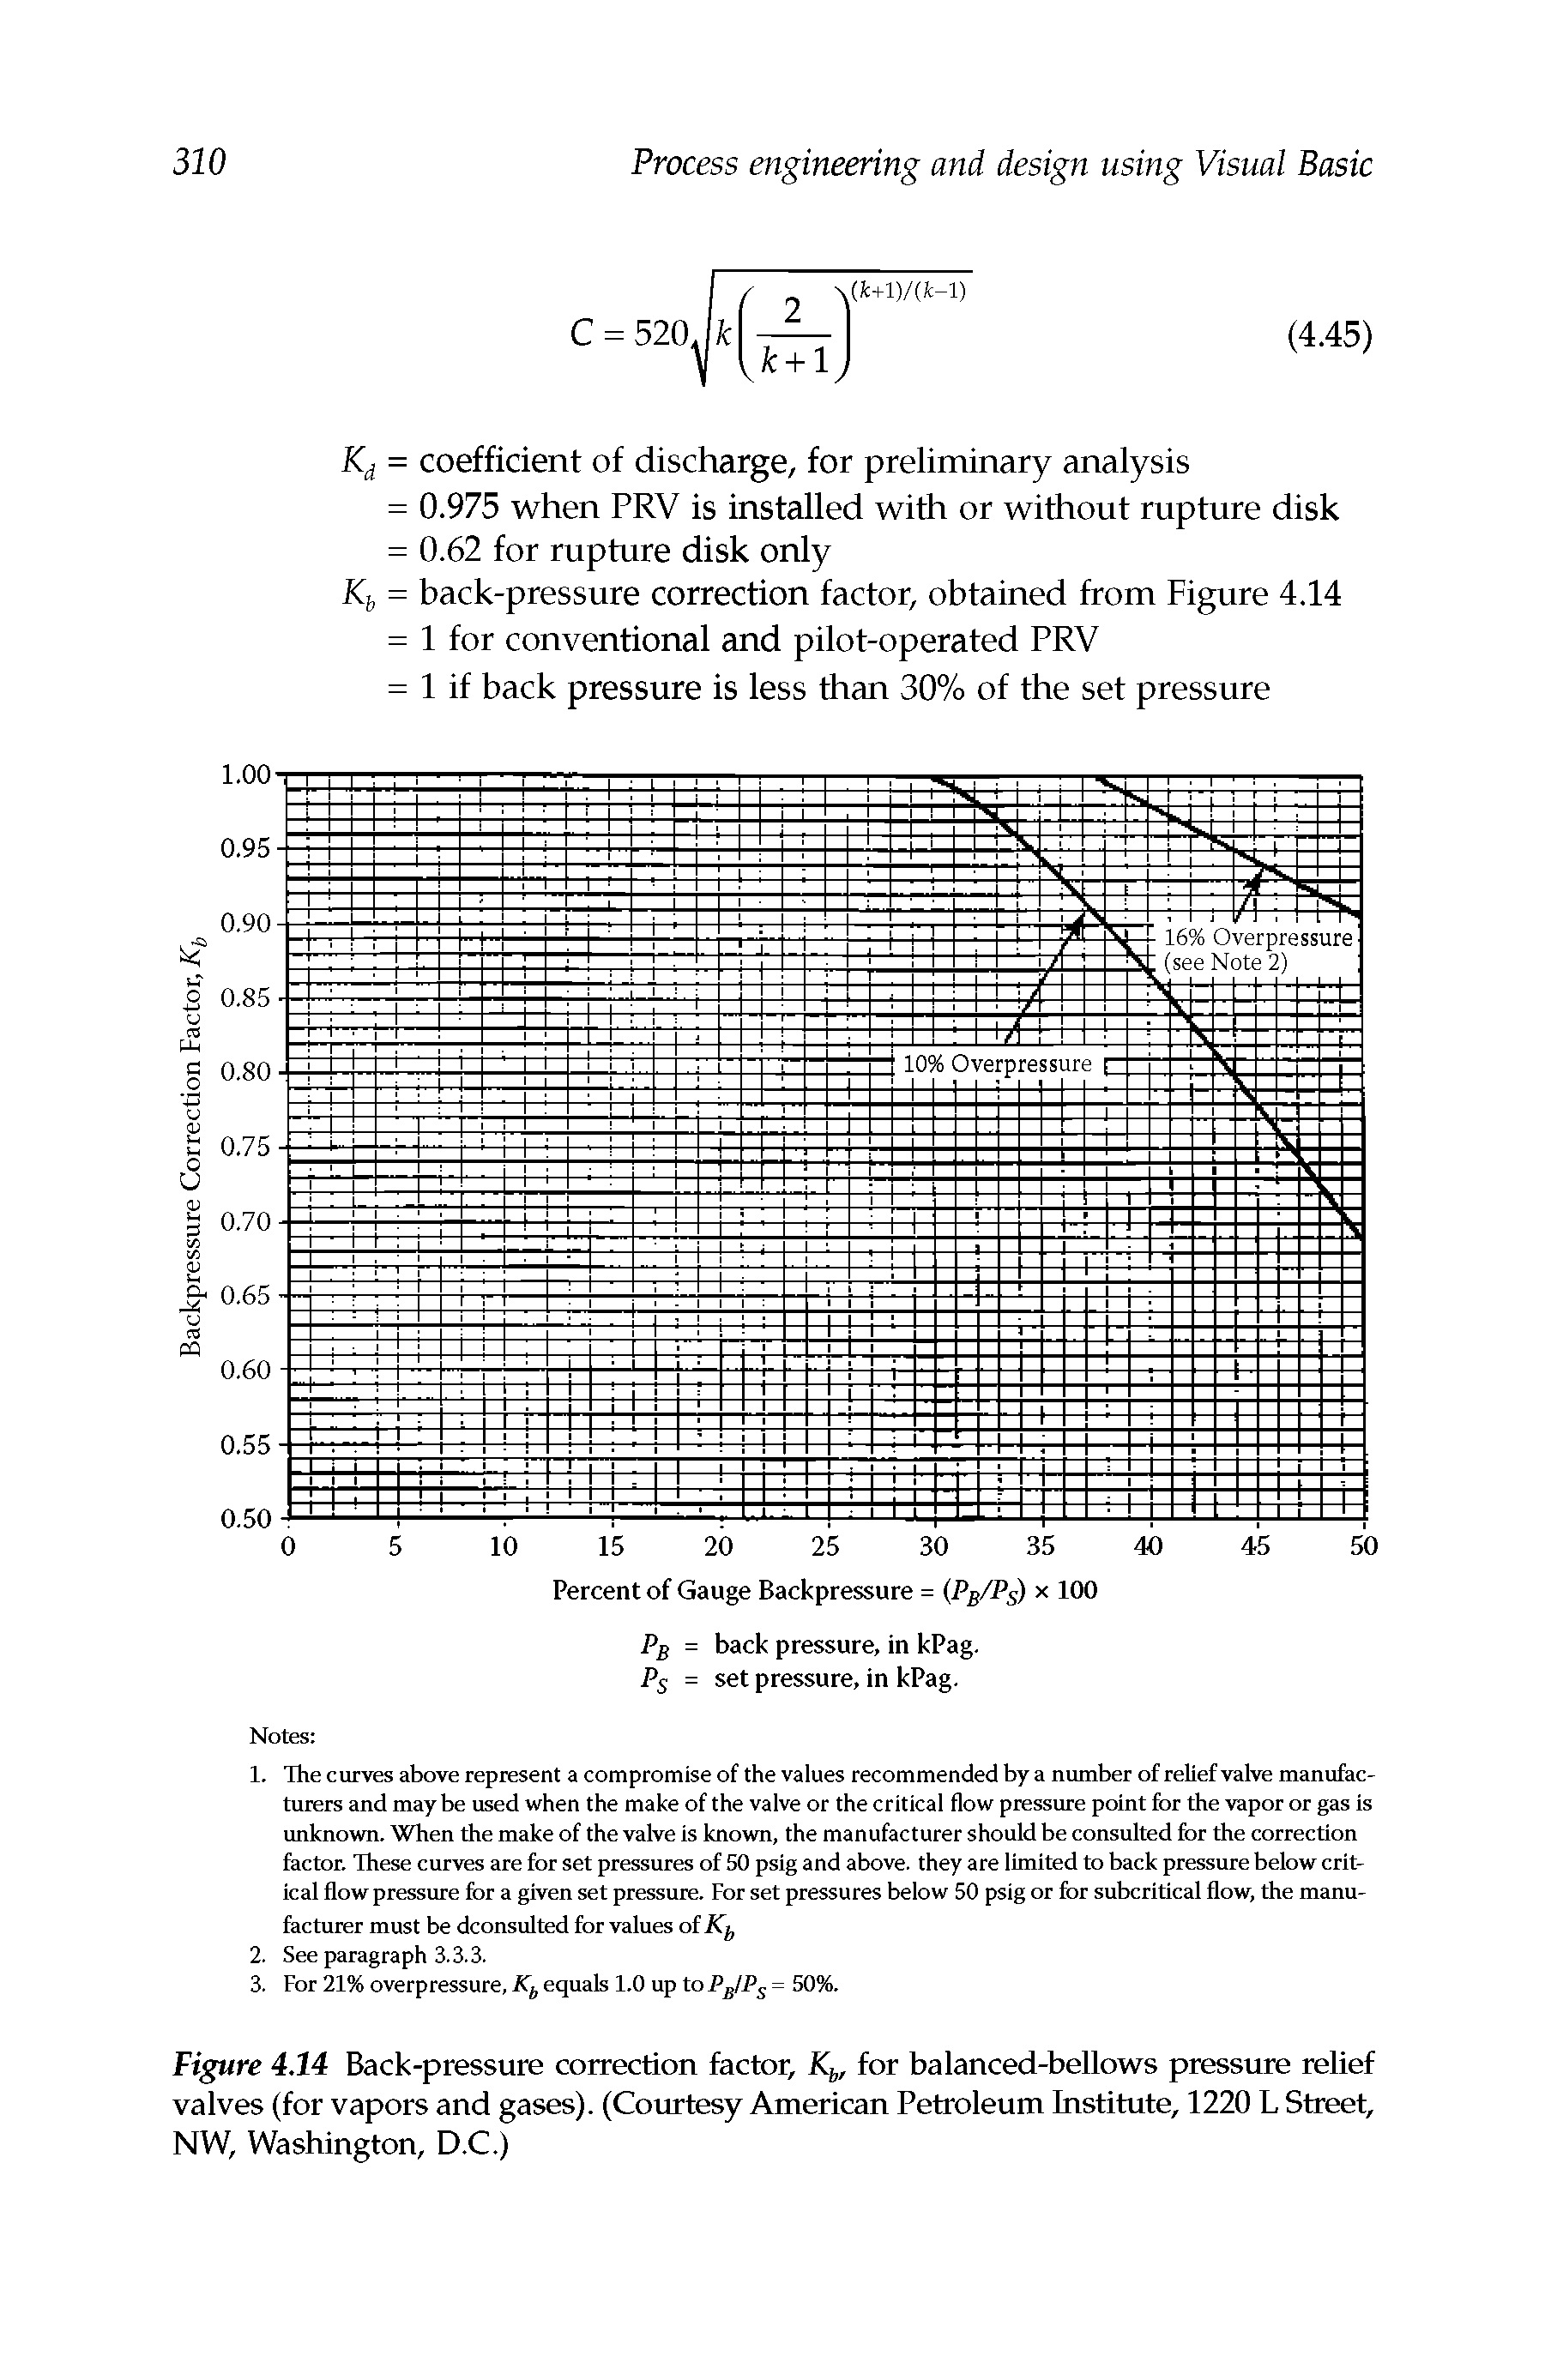 Figure 4.14 Back-pressure correction factor, K, for balanced-bellows pressure relief valves (for vapors and gases). (Courtesy American Petroleum Institute, 1220 L Street, NW, Washington, D.C.)...